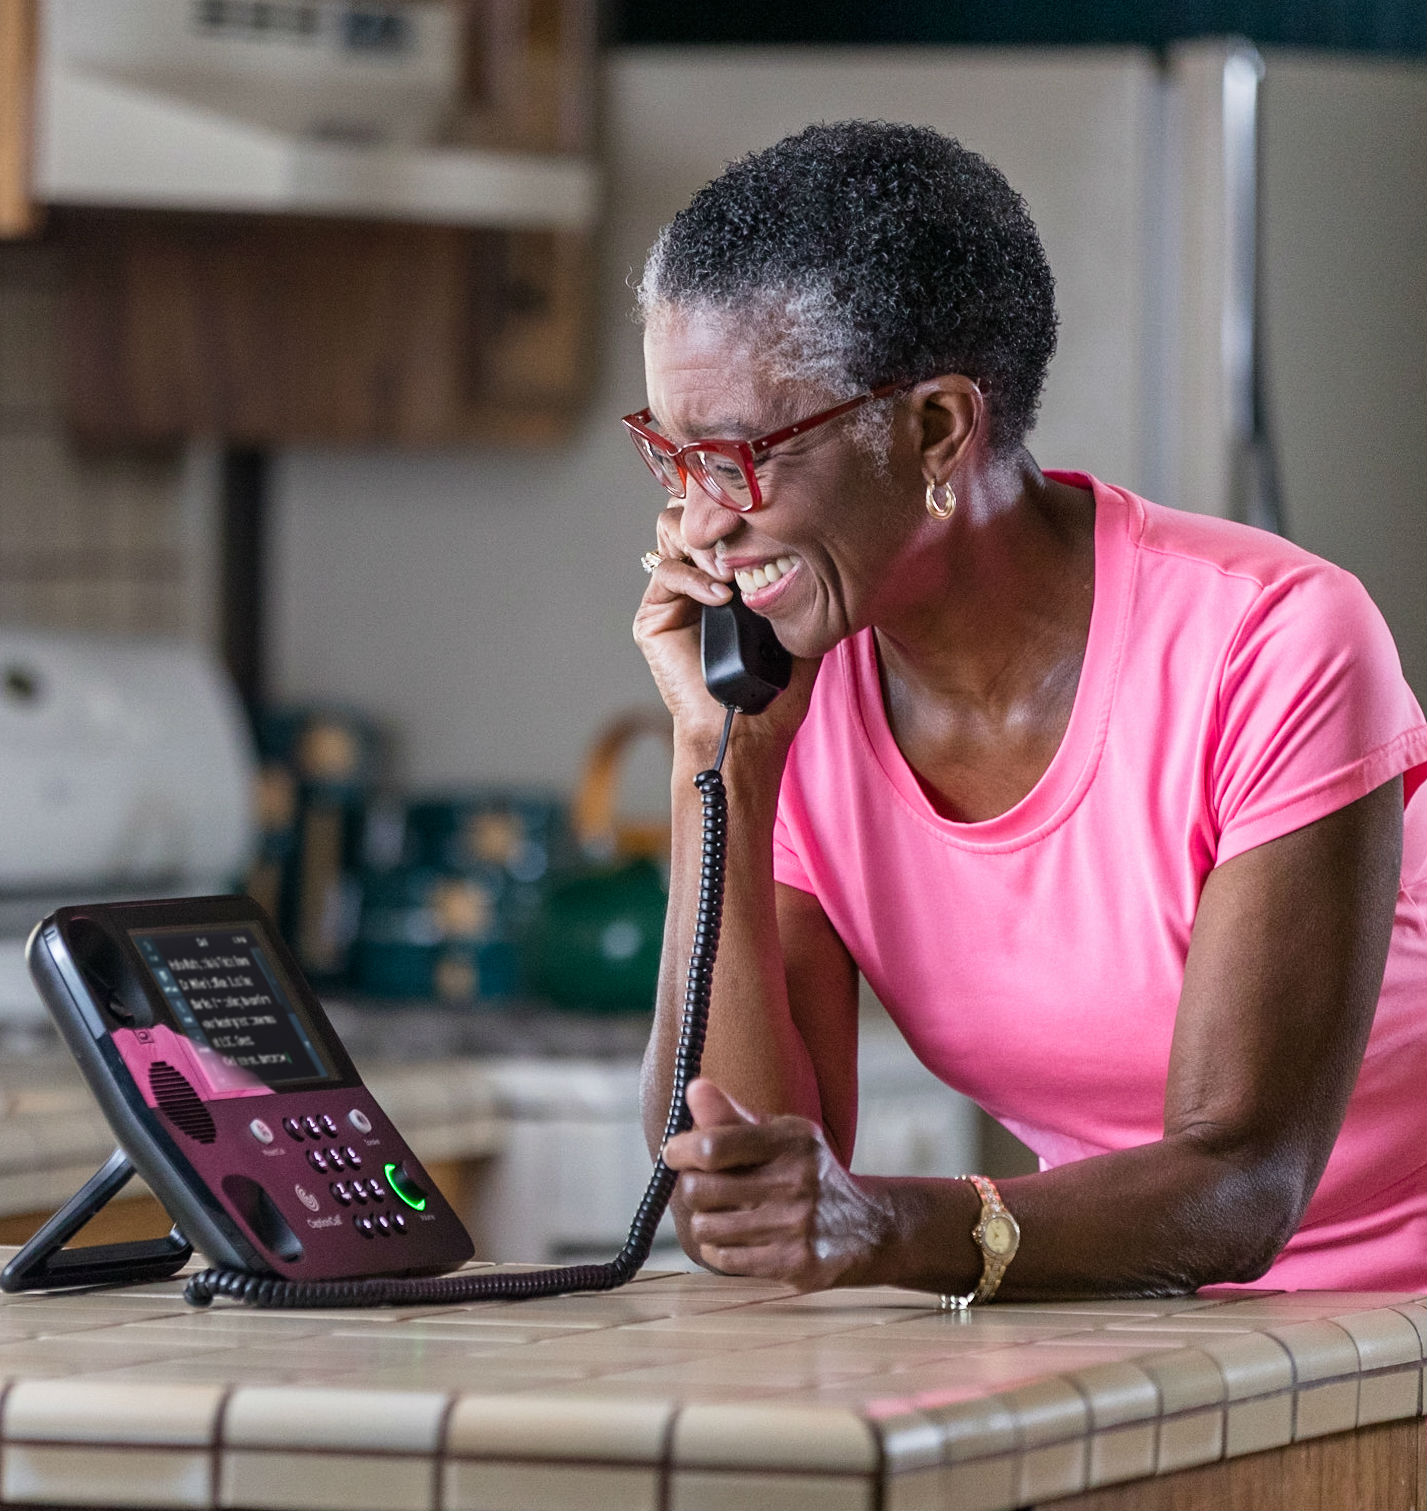 Smiling woman using a caption call telephone